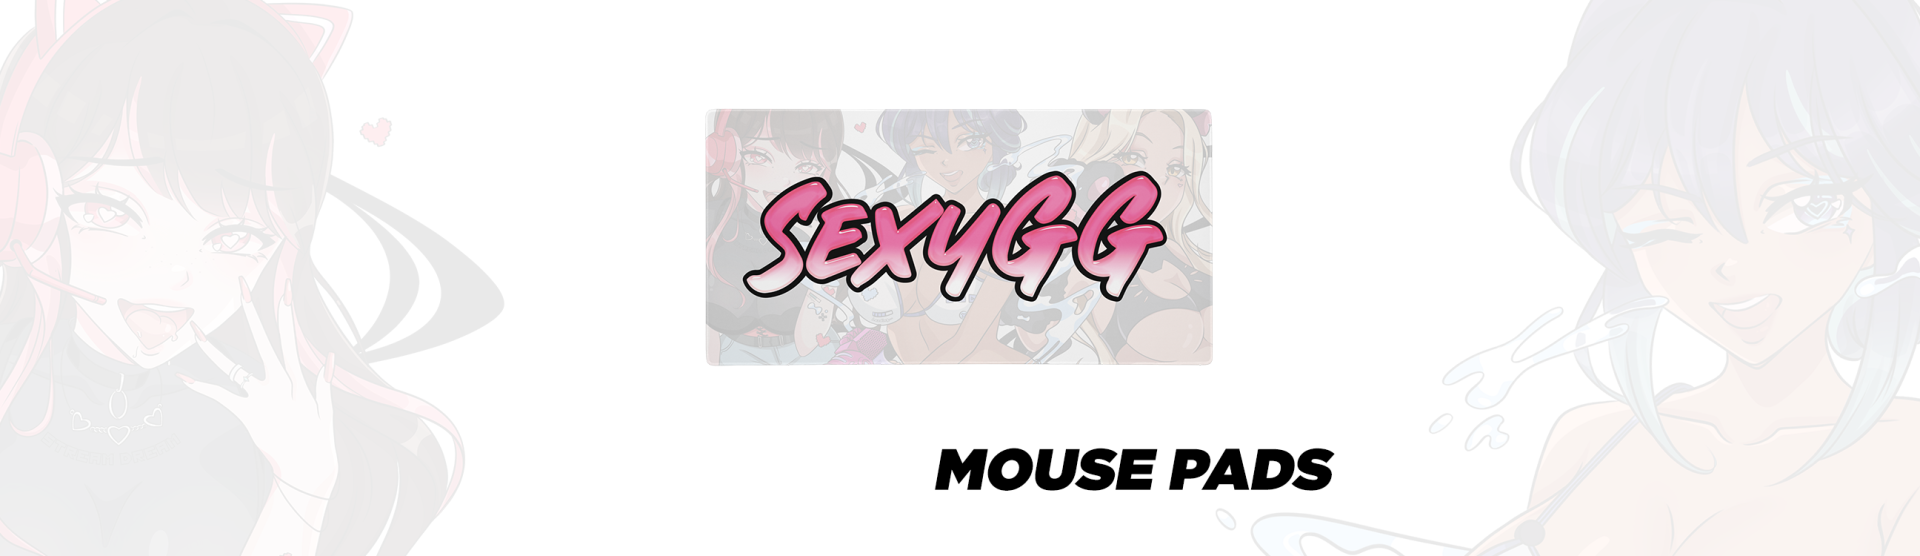 SexyGG Gaming Mouse Pads